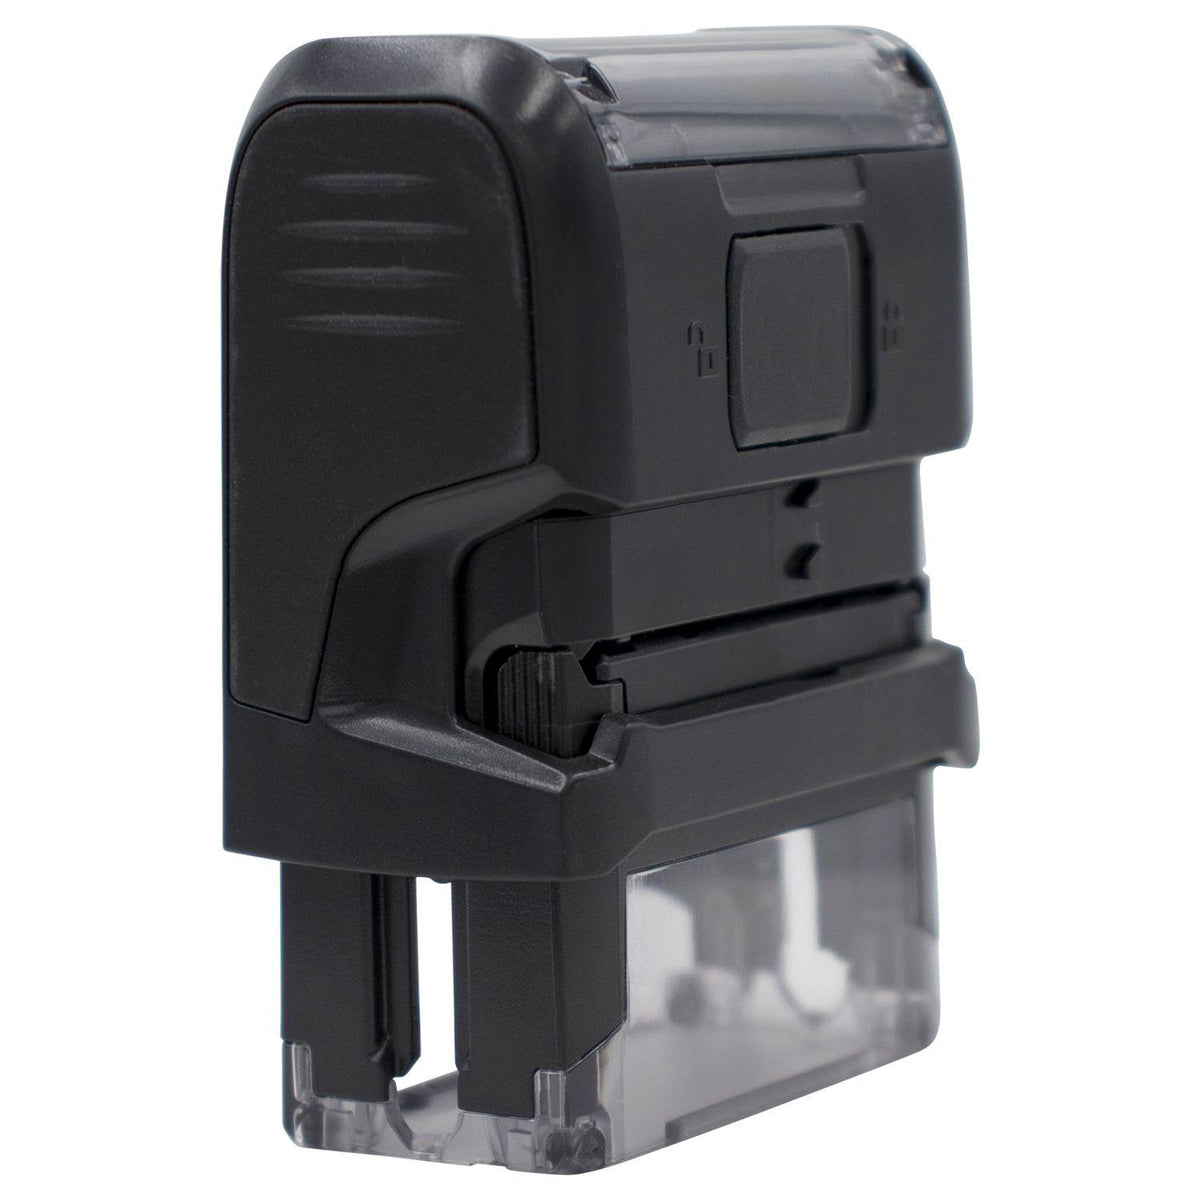 Self-Inking Atencion Inmediata Stamp - Engineer Seal Stamps - Brand_Trodat, Impression Size_Small, Stamp Type_Self-Inking Stamp, Type of Use_Office, Type of Use_Professional